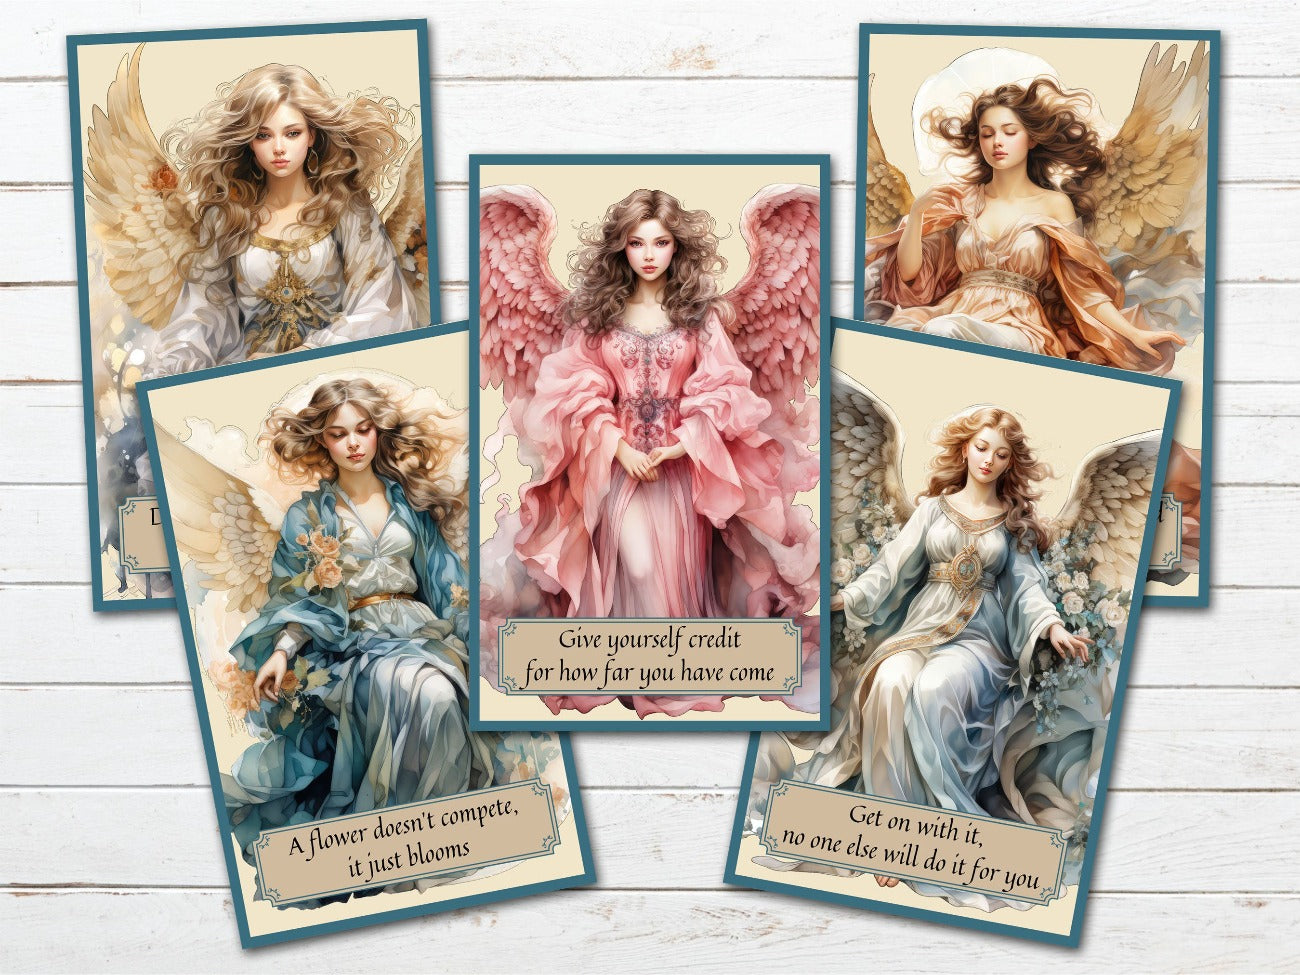 Angel Oracle Cards - A Divine Connection for Guidance, Close up image of 5 Angel Cards featuring beautiful angels with inspirational quotes - Morgana Magick Spell